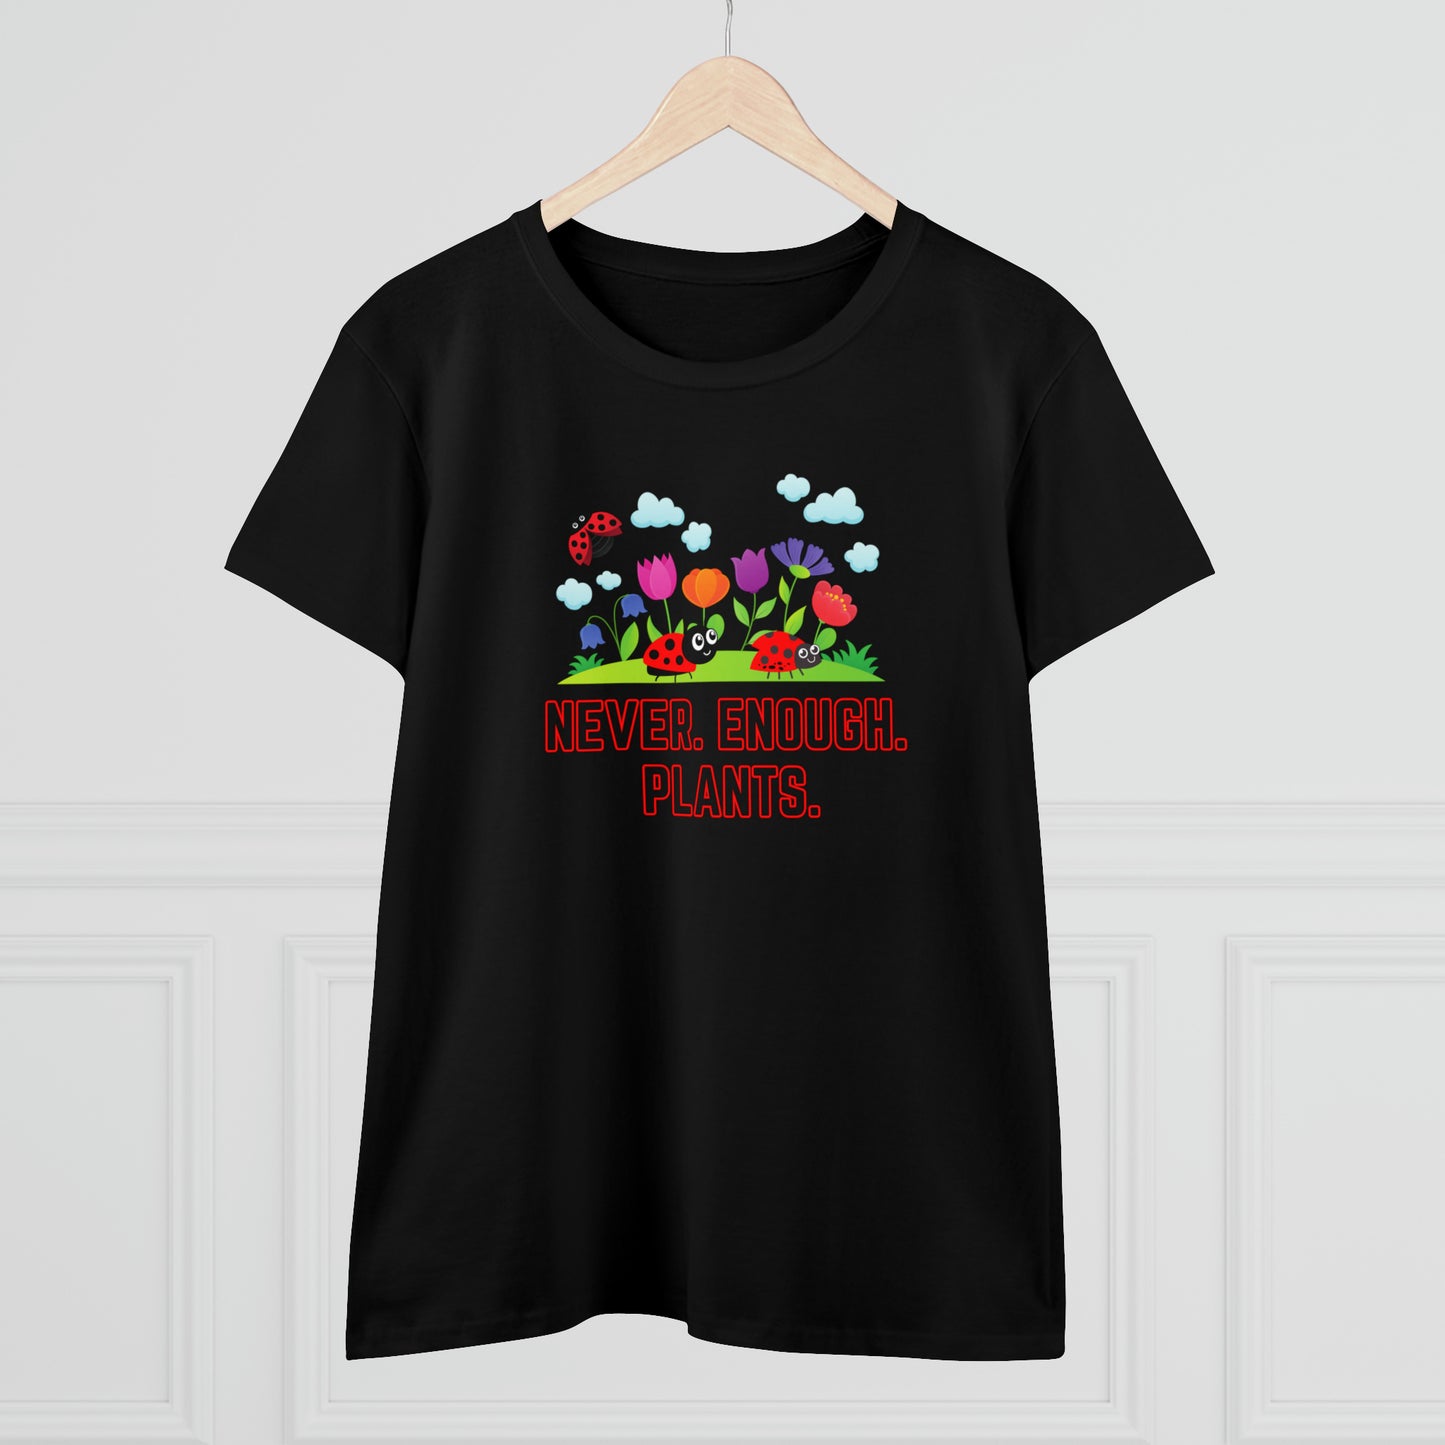 Nature, Plants, Never Enough Plants, Ladybug, Bug- Adult, Semi-fitted, T-shirt